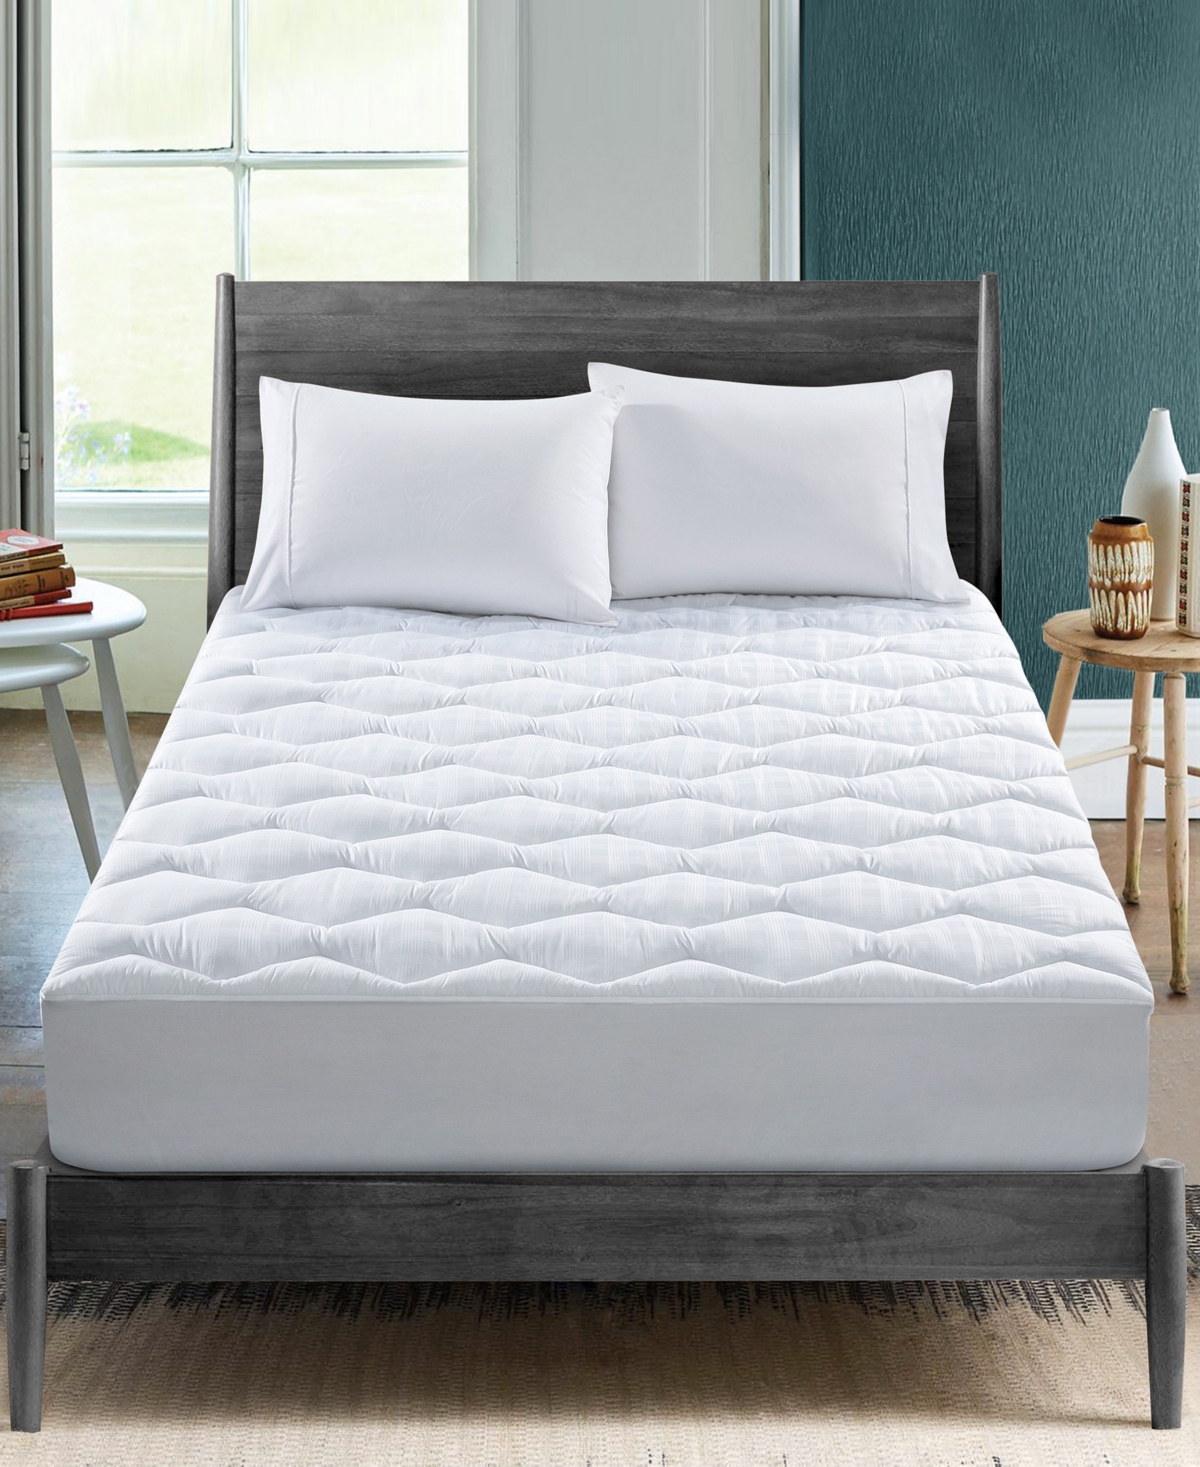 Unikome 100 Breathable Cotton Honeycomb Quilted Fitted Mattress Pad Collection In White